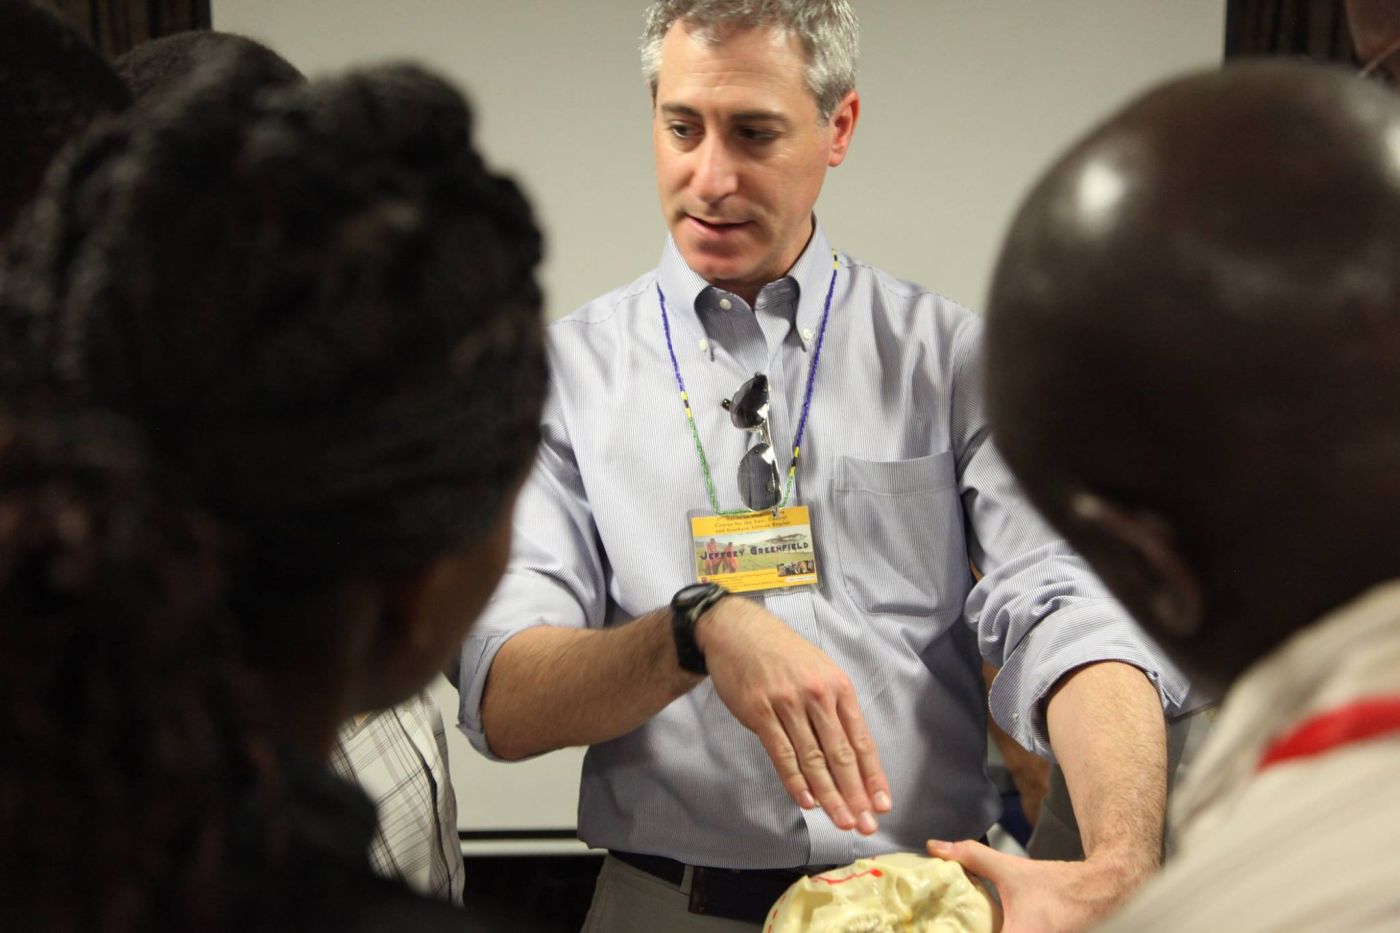 In 2014, Dr. Greenfield joined the team to add pediatric expertise to the Tanzania trip